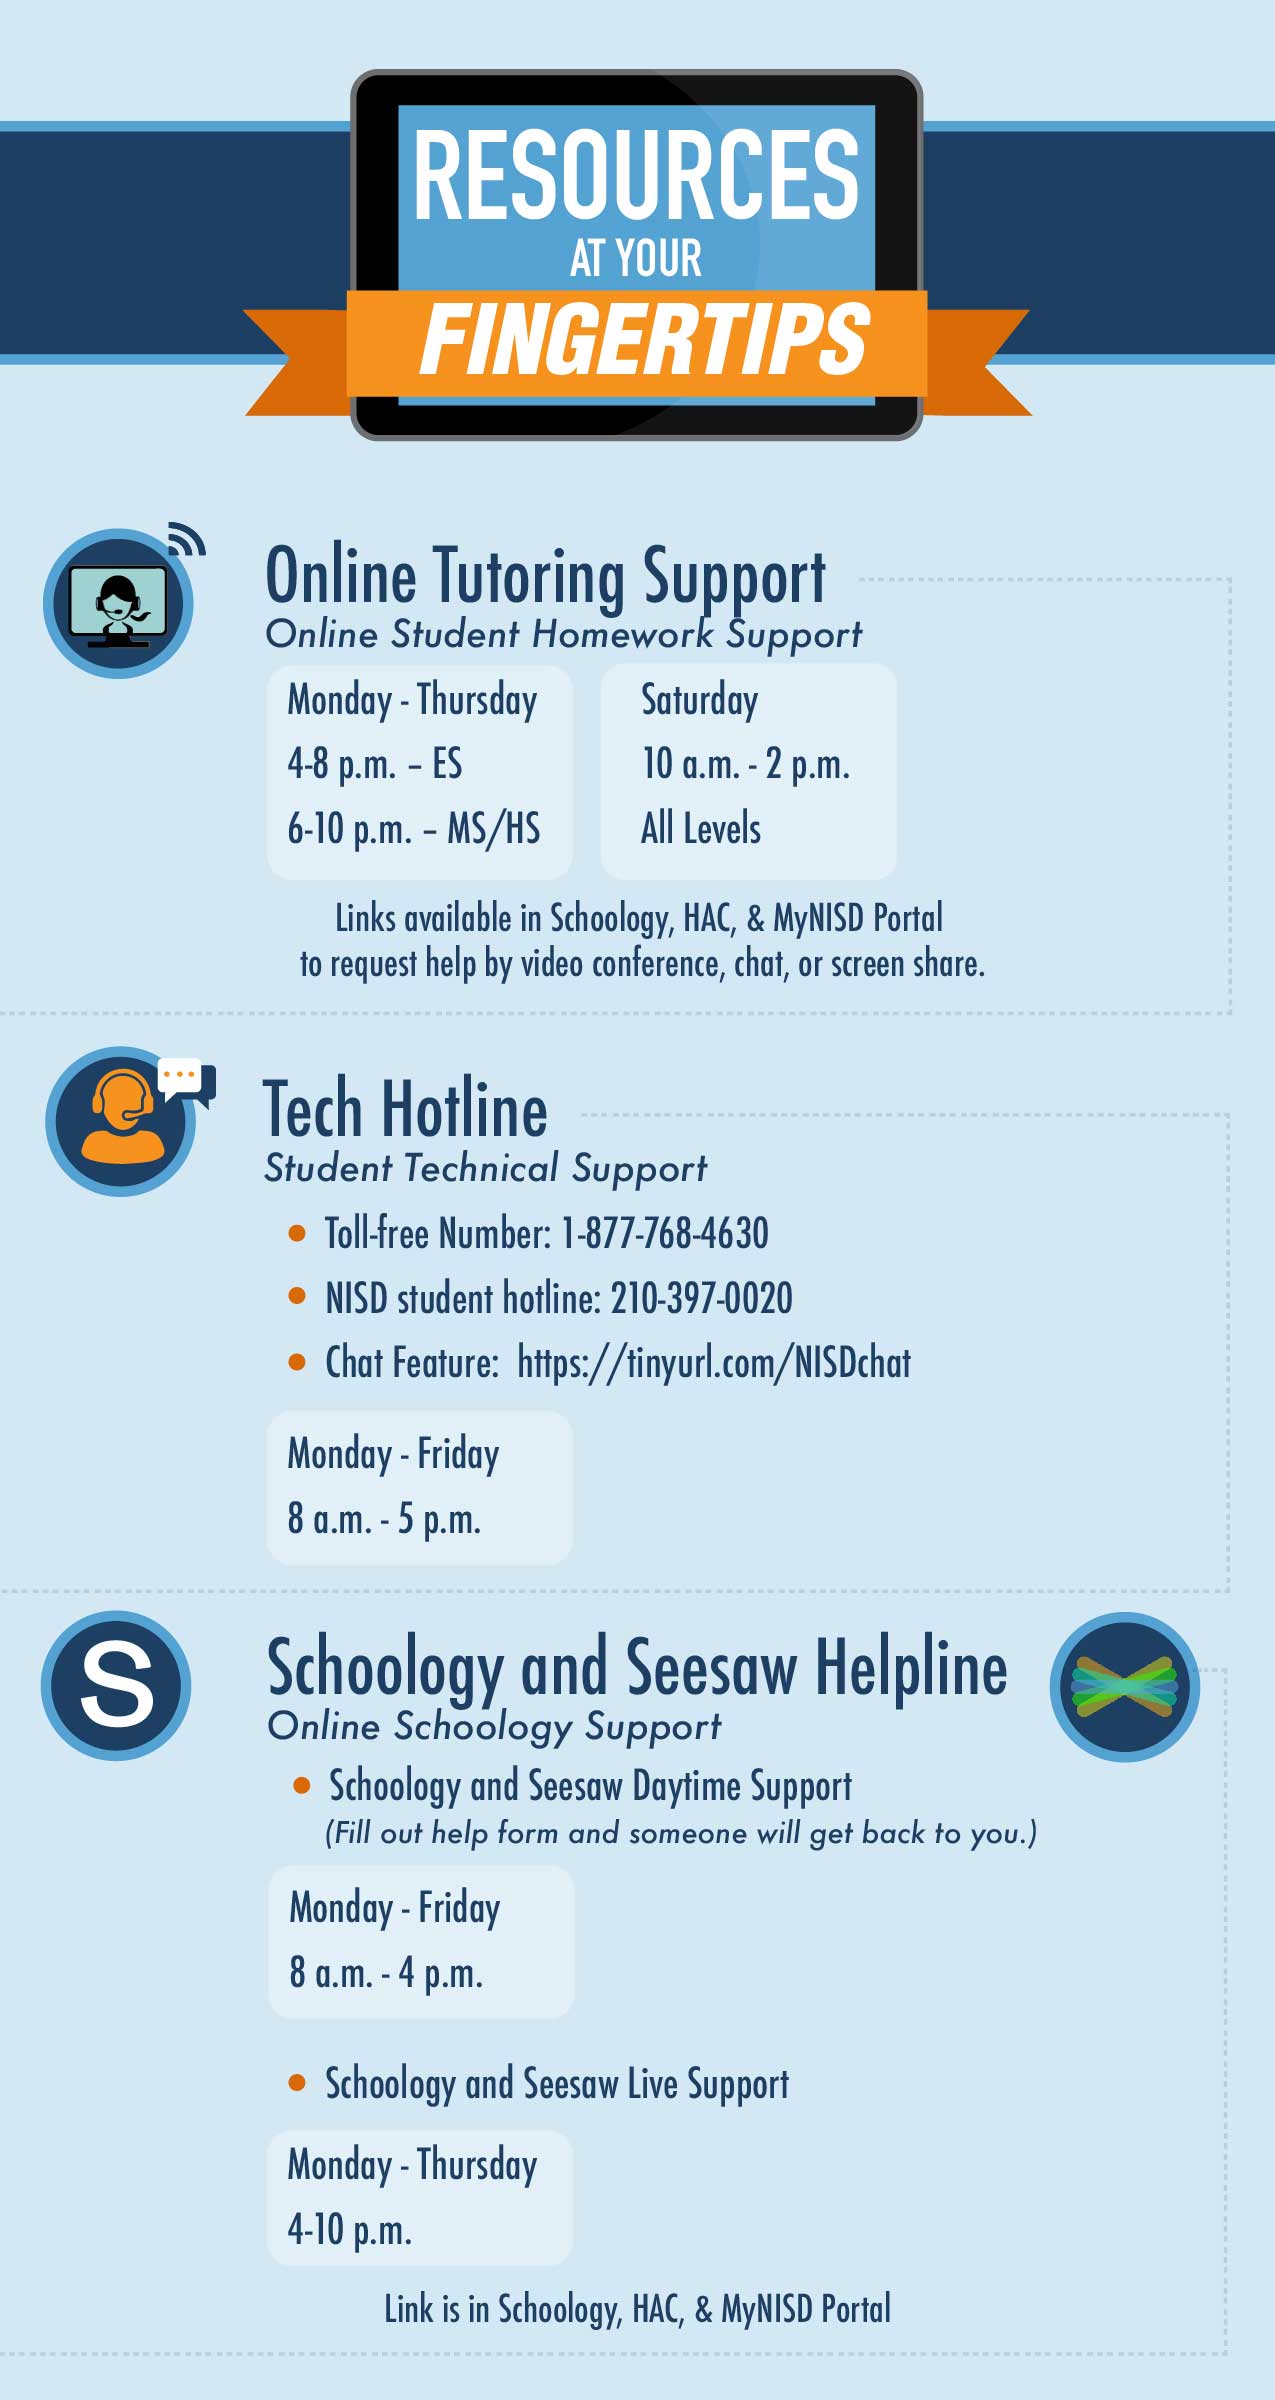 Tutoring, Helpline and Schoology and Seesaw Flyer